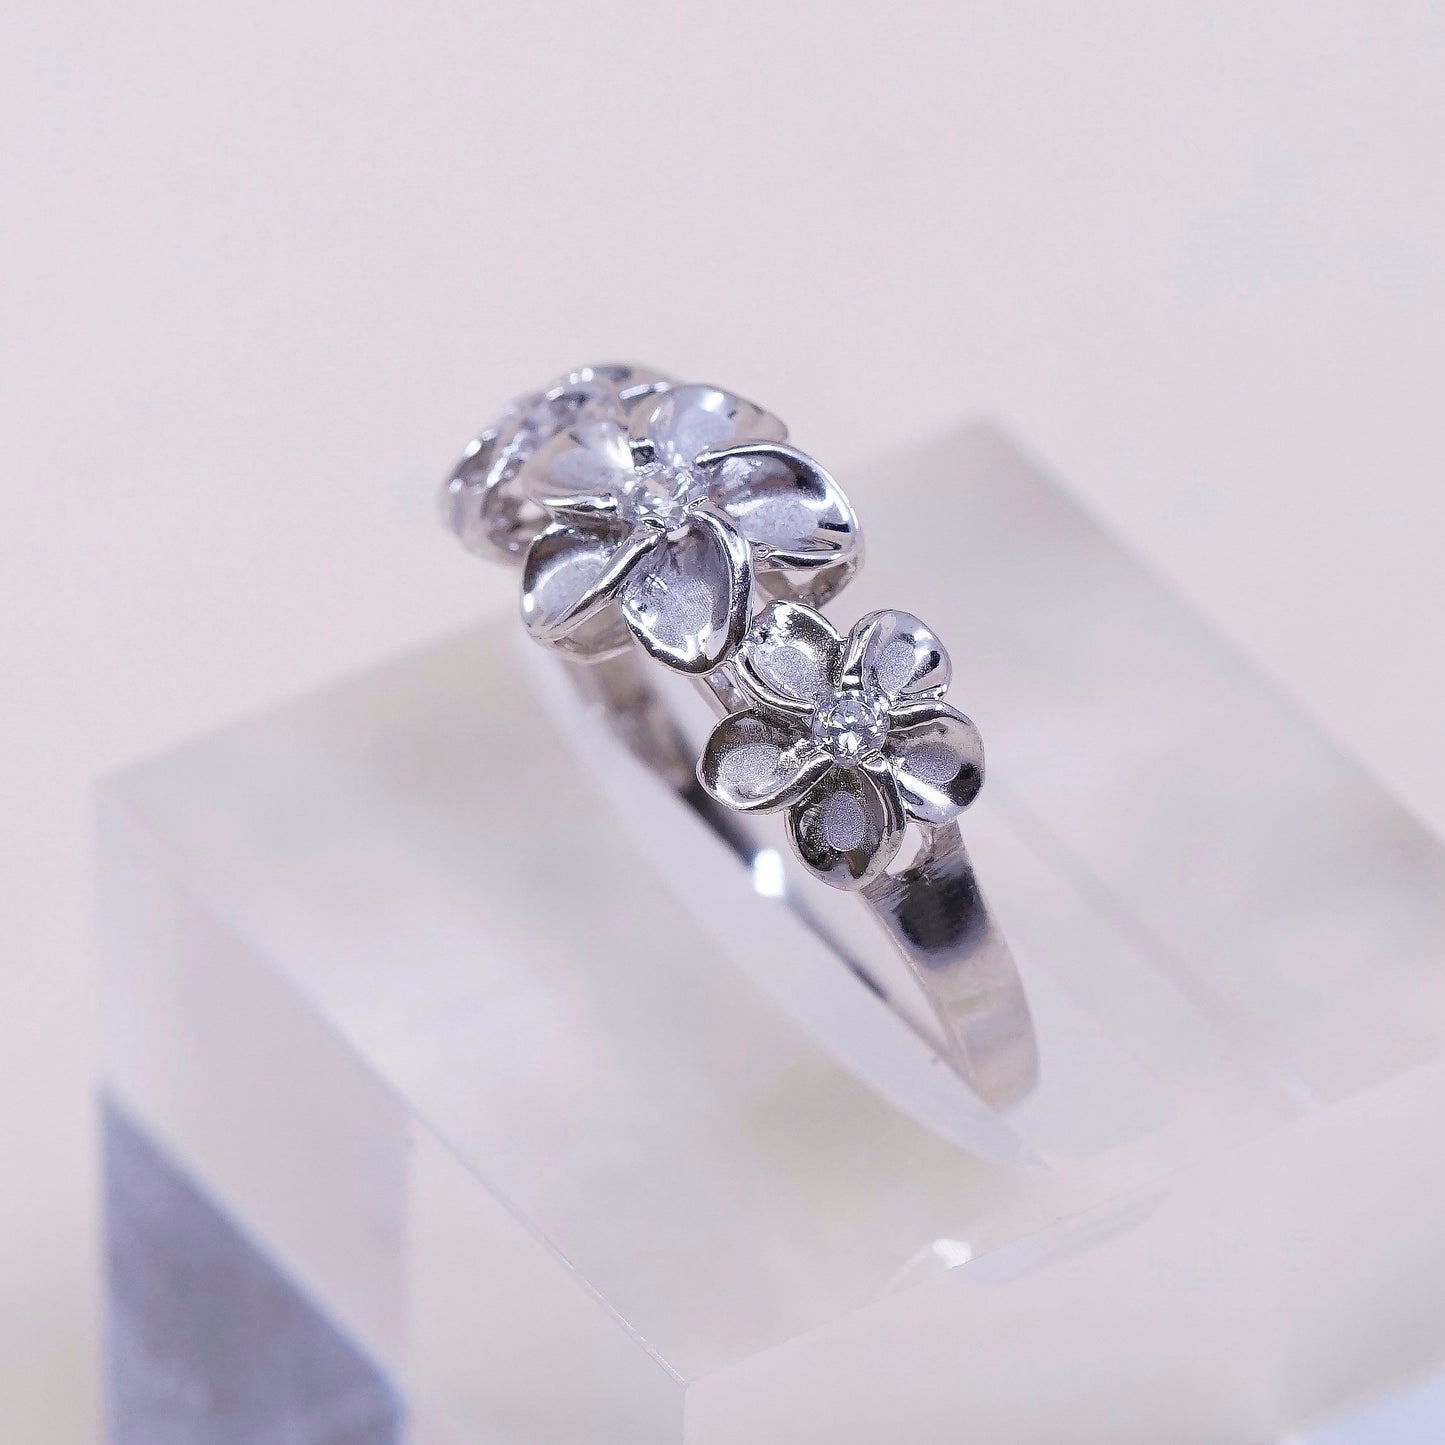 sz 9.25, vtg sterling silver daisy flower w/ crystal ring, stamped 925